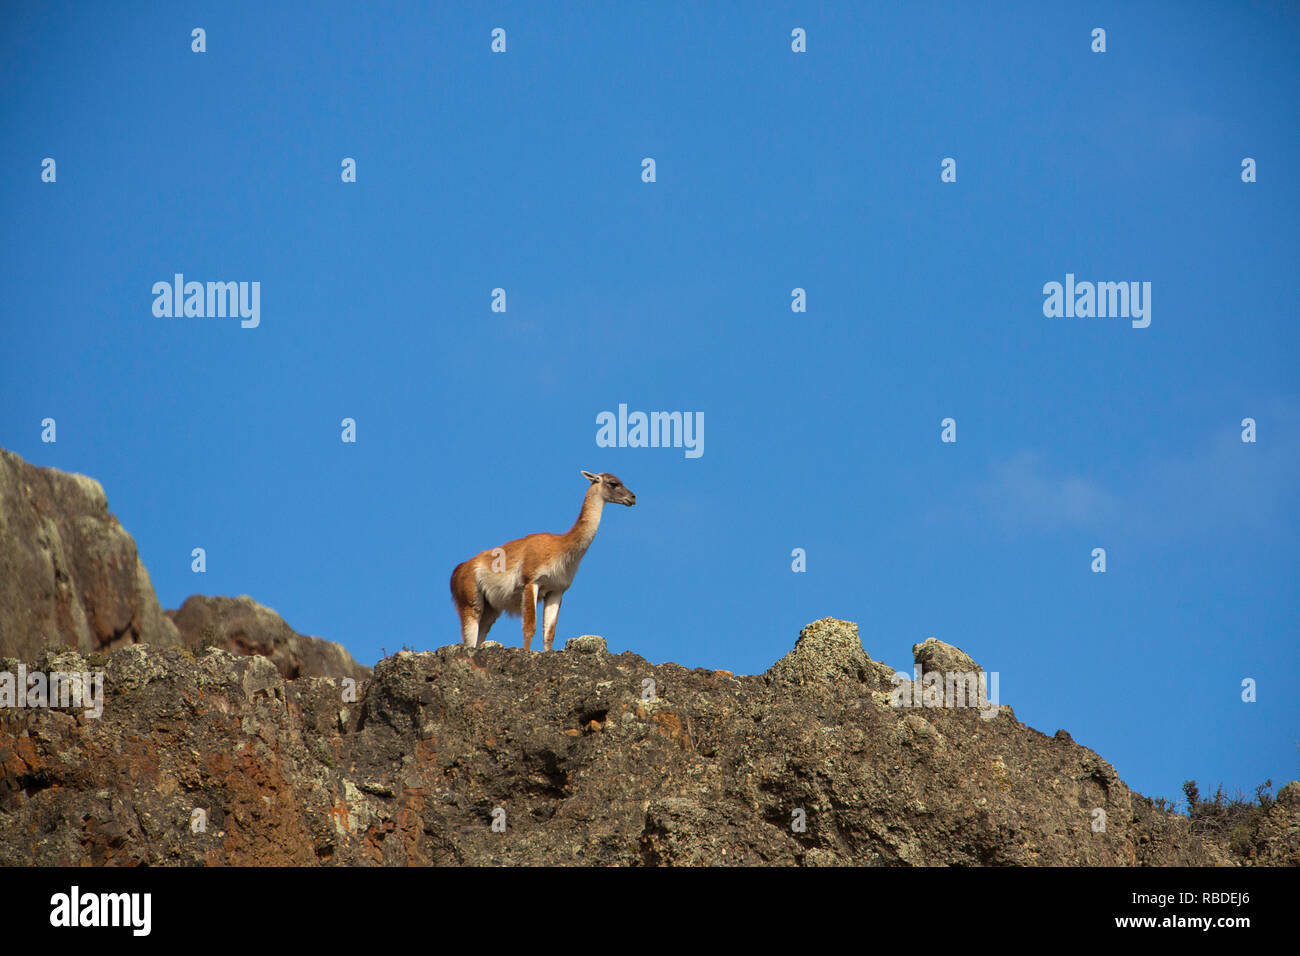 A Guanaco (Lama guanicoe) poses on an outcrop in Torres Del Paine National Park of Chile. Wild Stock Photo